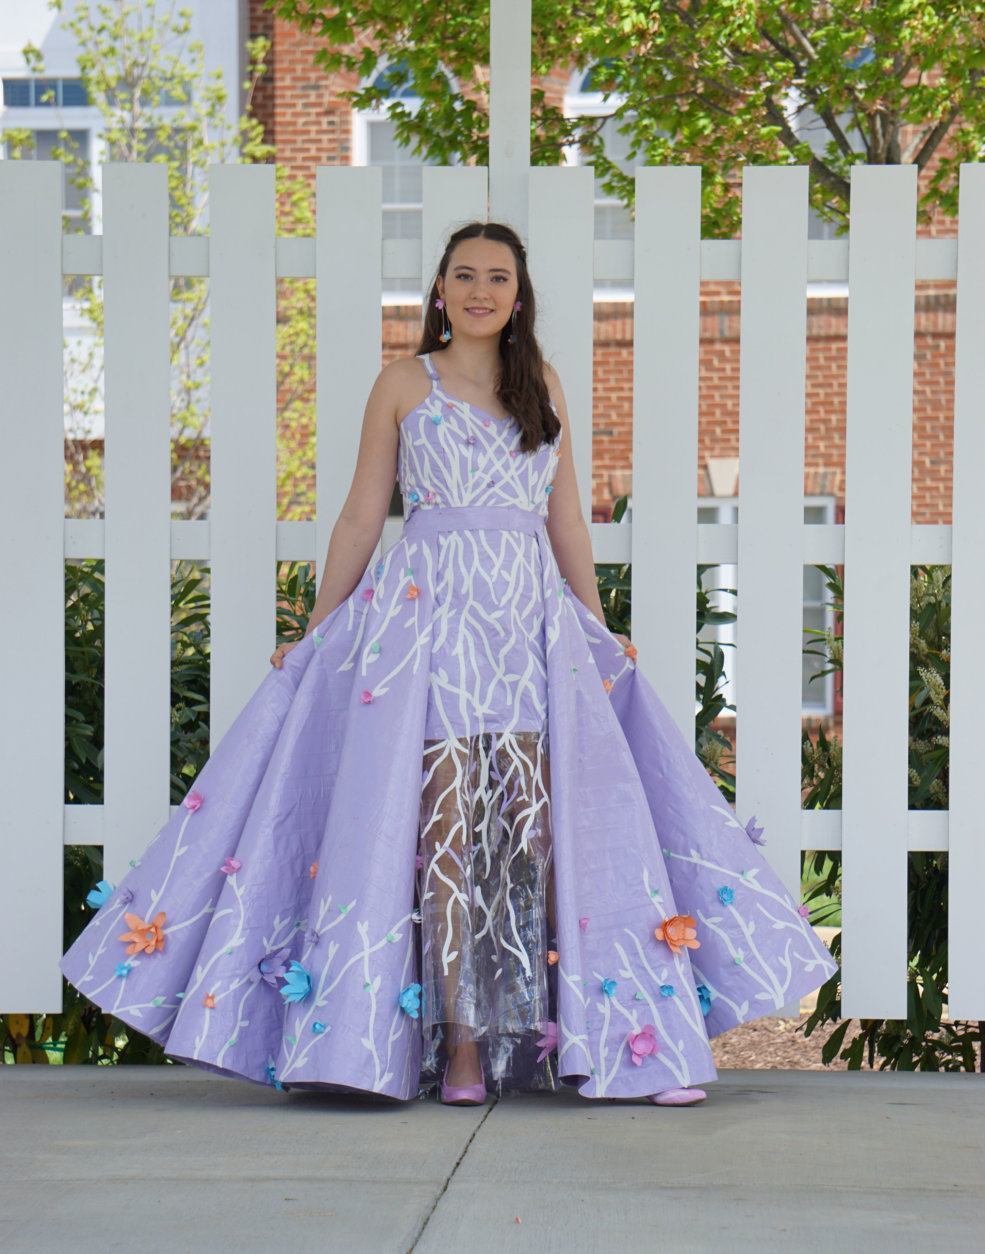 With Duct Tape Dress Design Va Teen Is Finalist In National